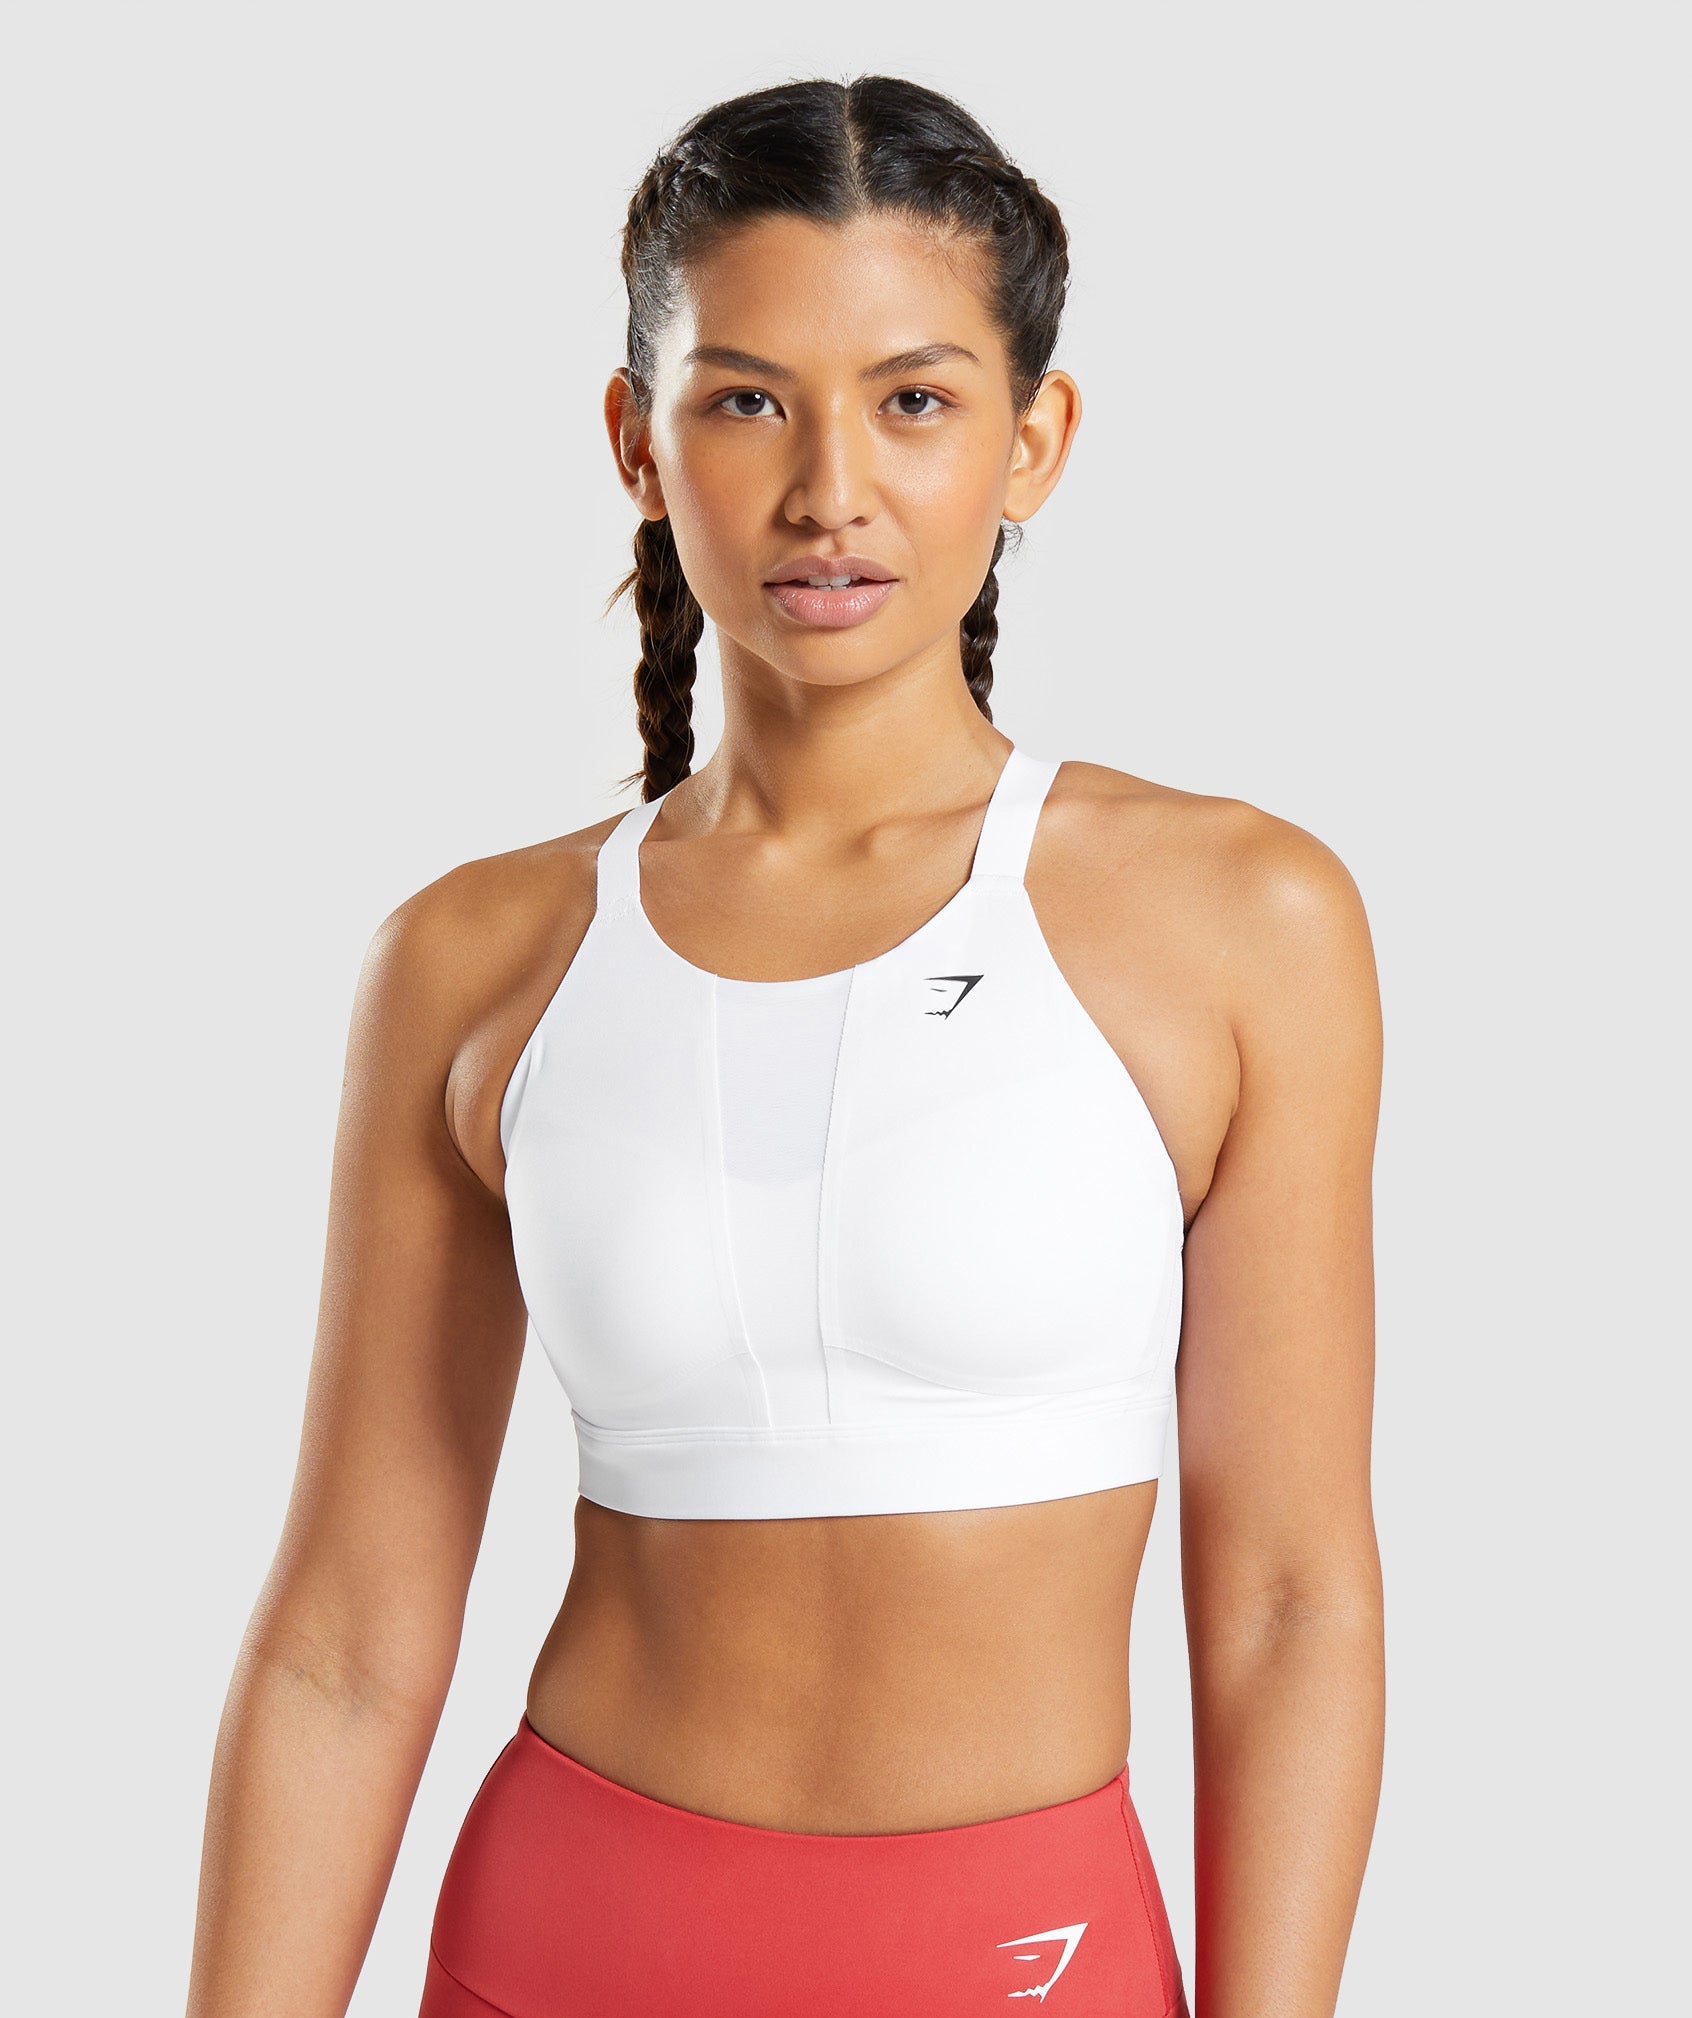 Fit Fabulous High Quality, Supportive, Gym Padded Sports Bra Workout,  Fitness, Exercise, Rare and Unique 